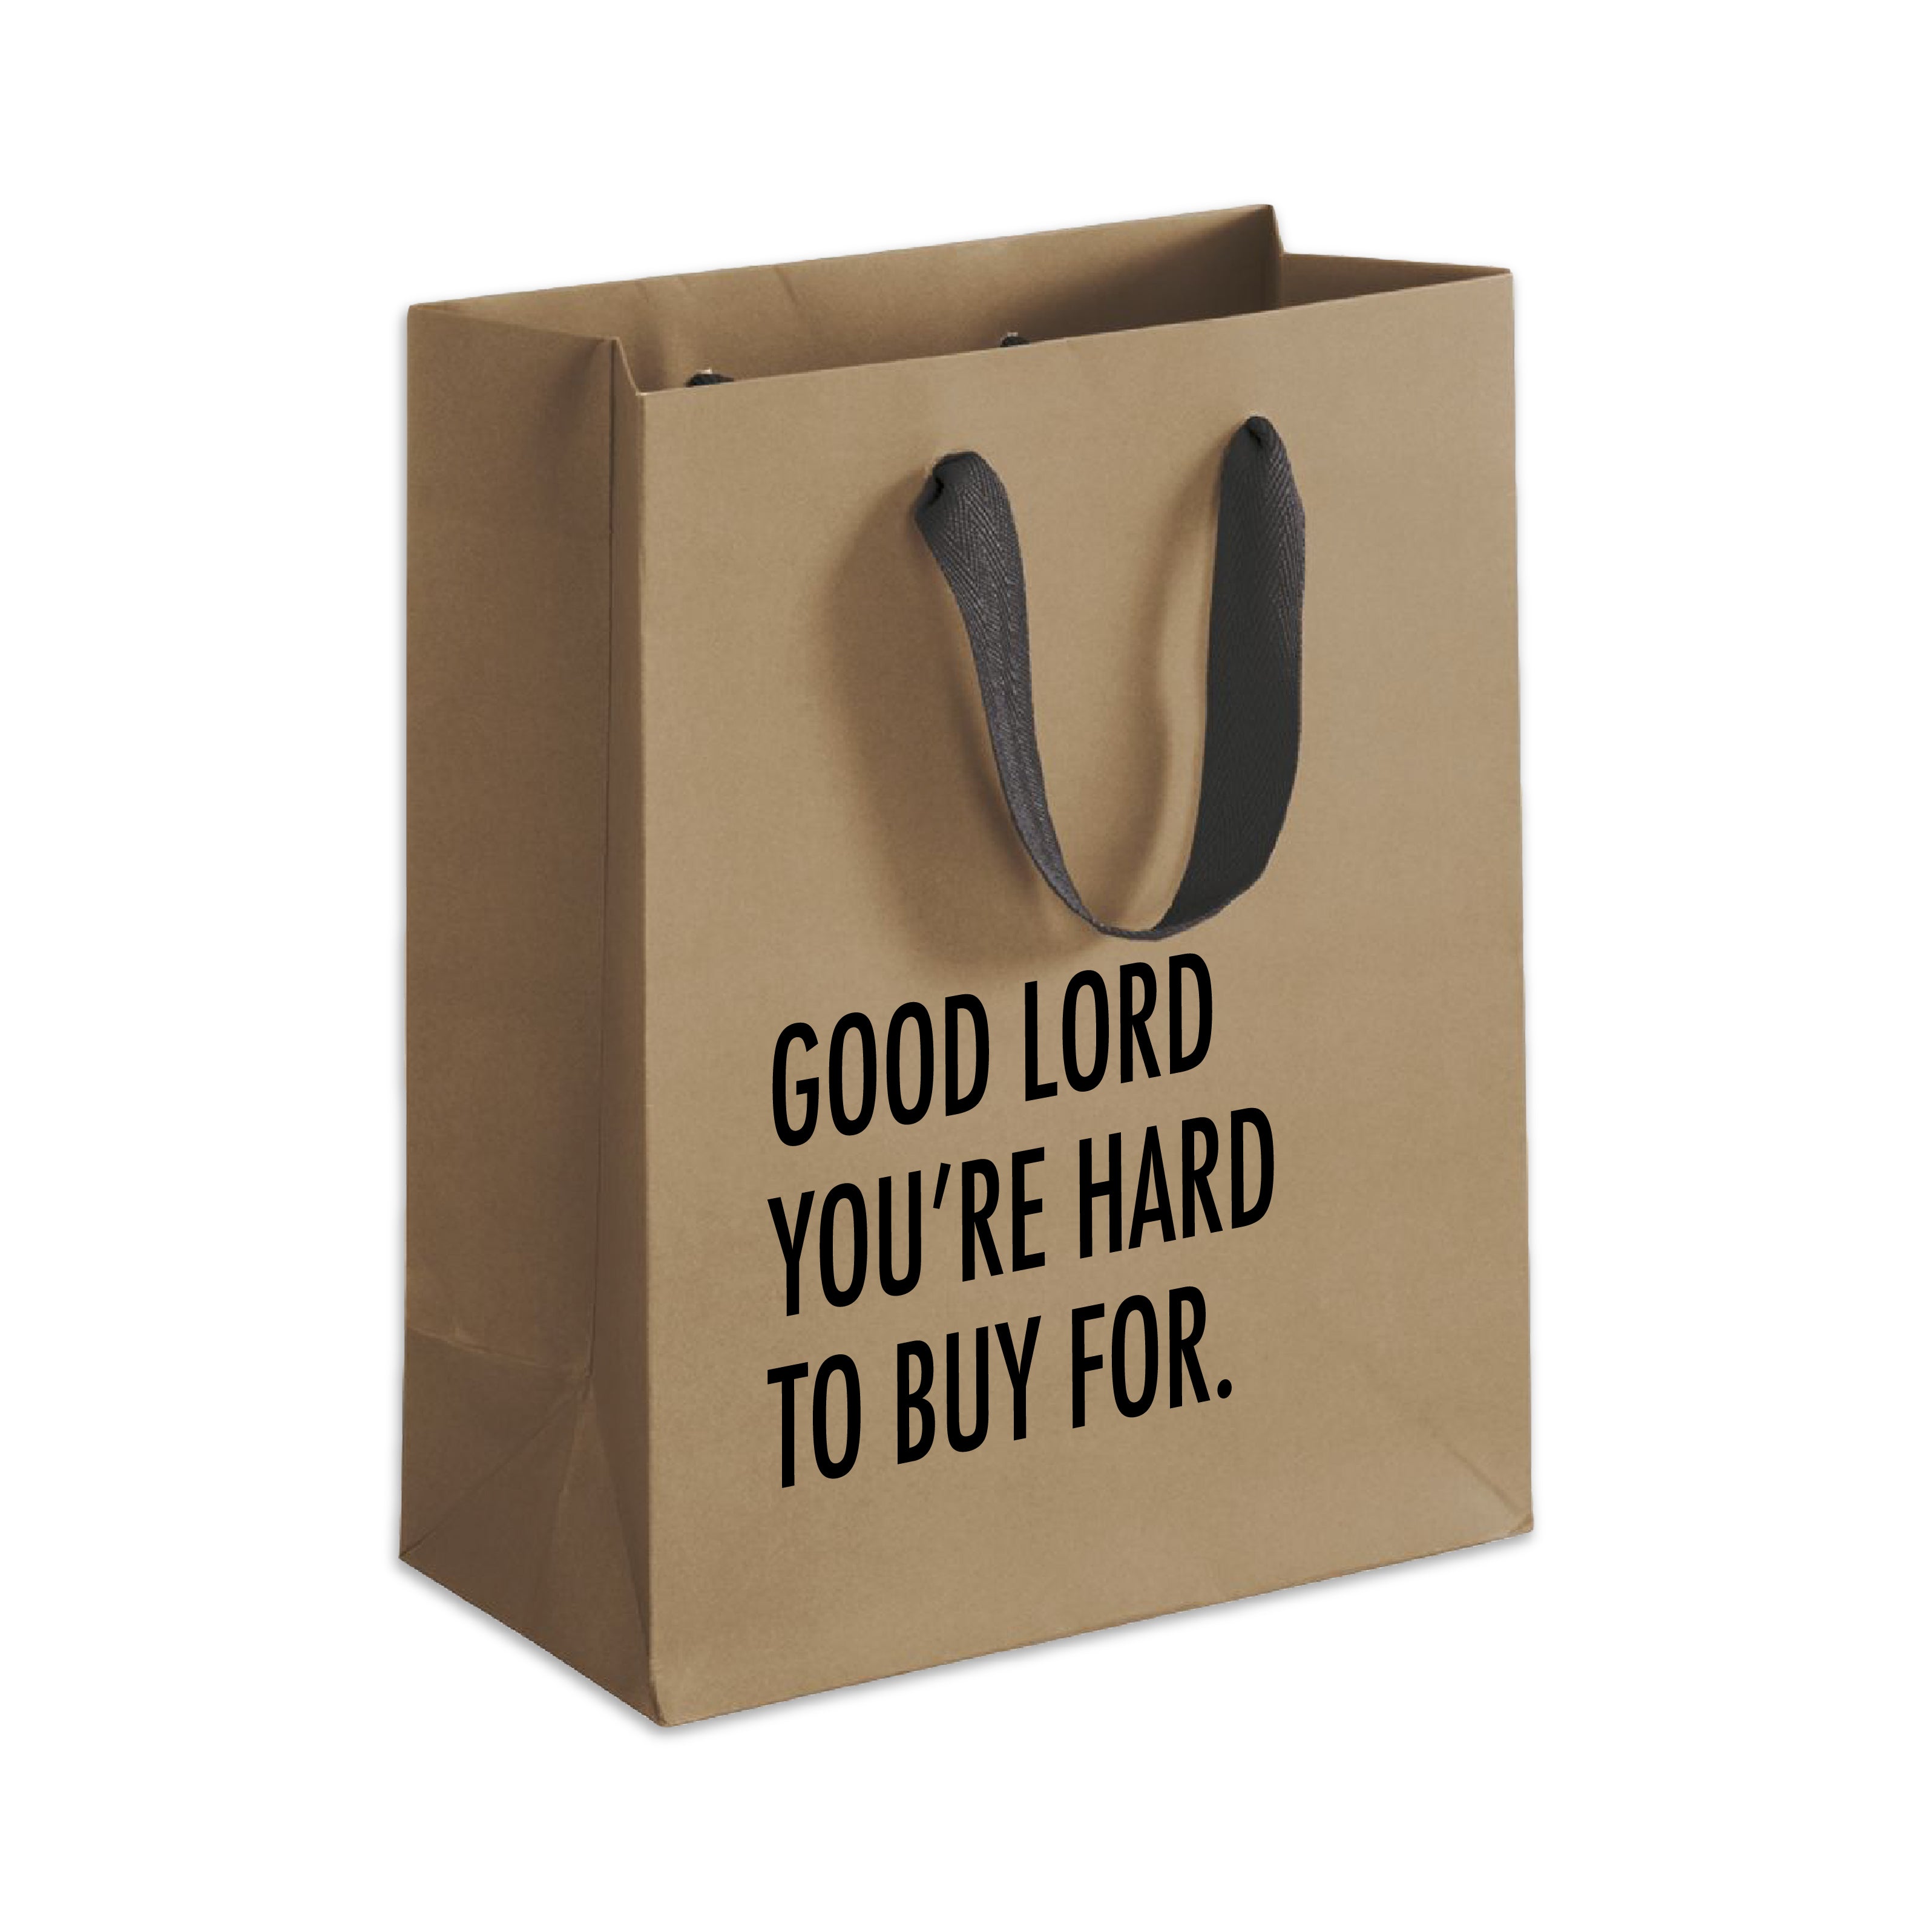 A Perfect Gift For People Who Are Hard to Shop For